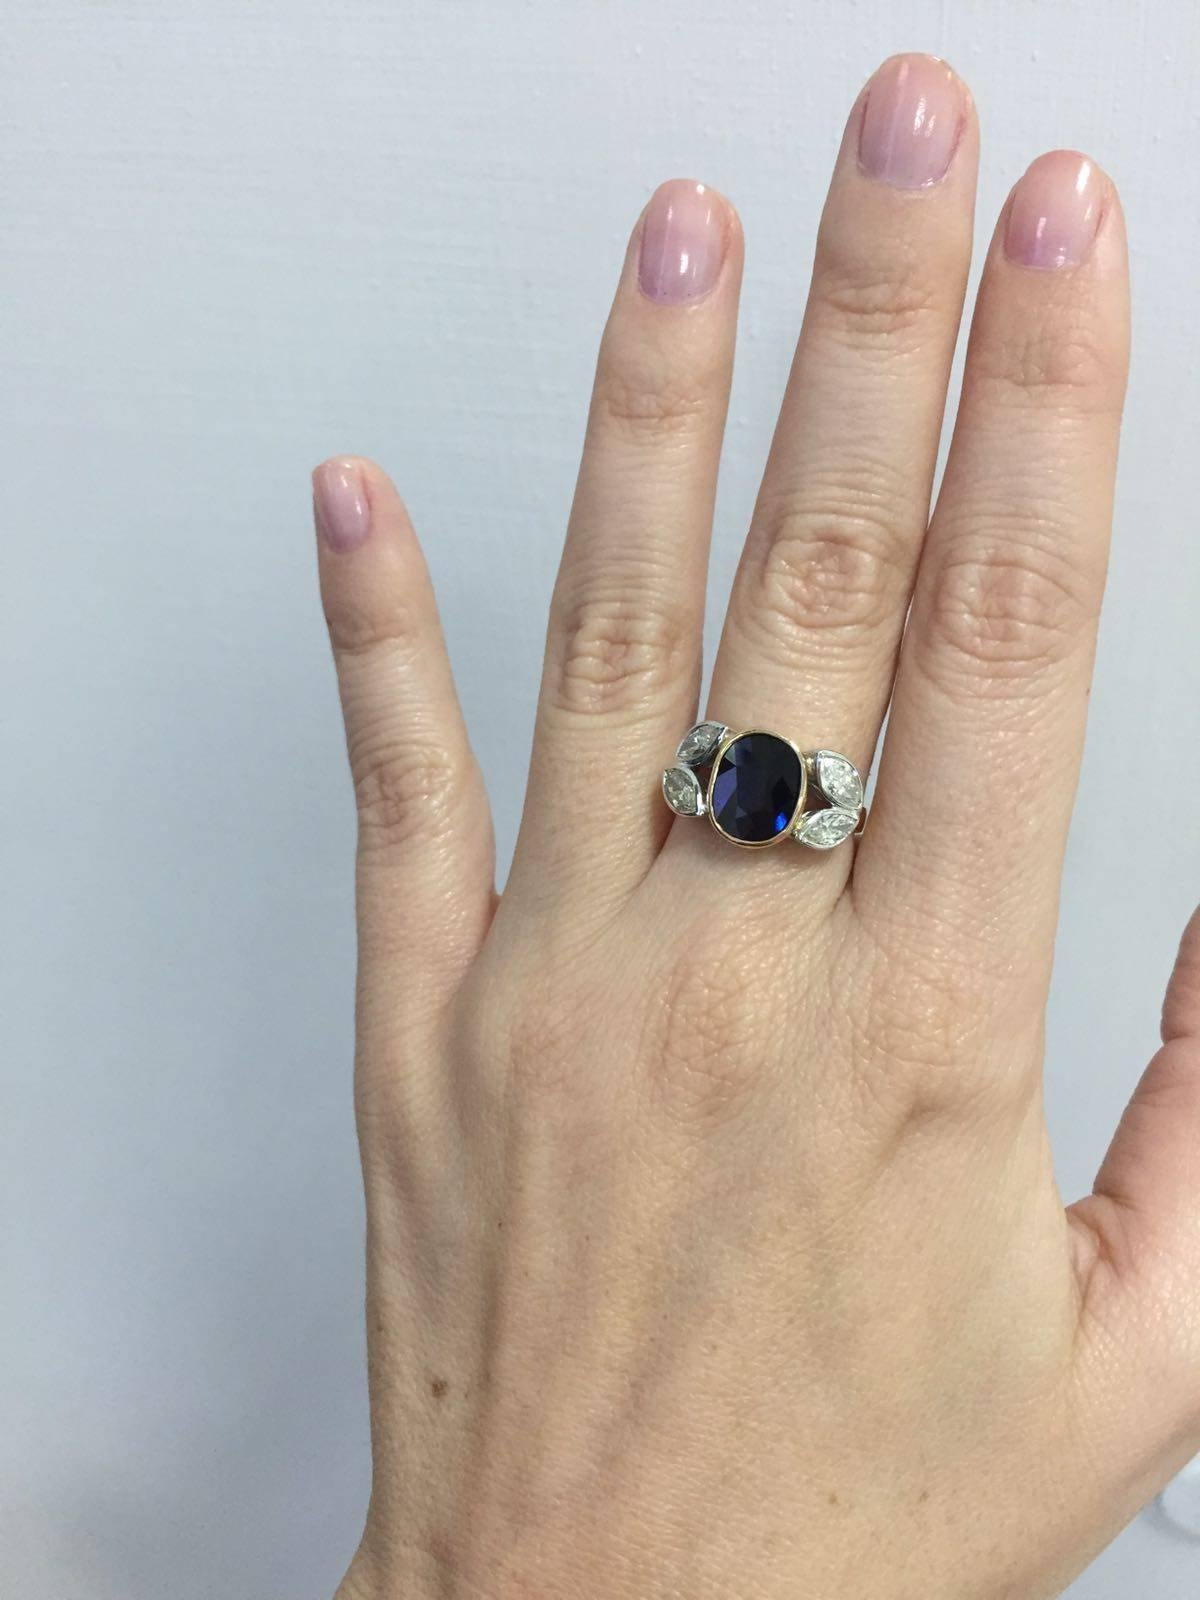 18k Yellow and White Gold Ring feauturing a beautiful Natural Blue Sapphire weighing approximately 3.00ct accented by four sparkling marquise cut diamonds weighing approximately 1.50ct total. graded G/H Vvs1

Gross Weight: 6.3 gr
Origin: France
Ring